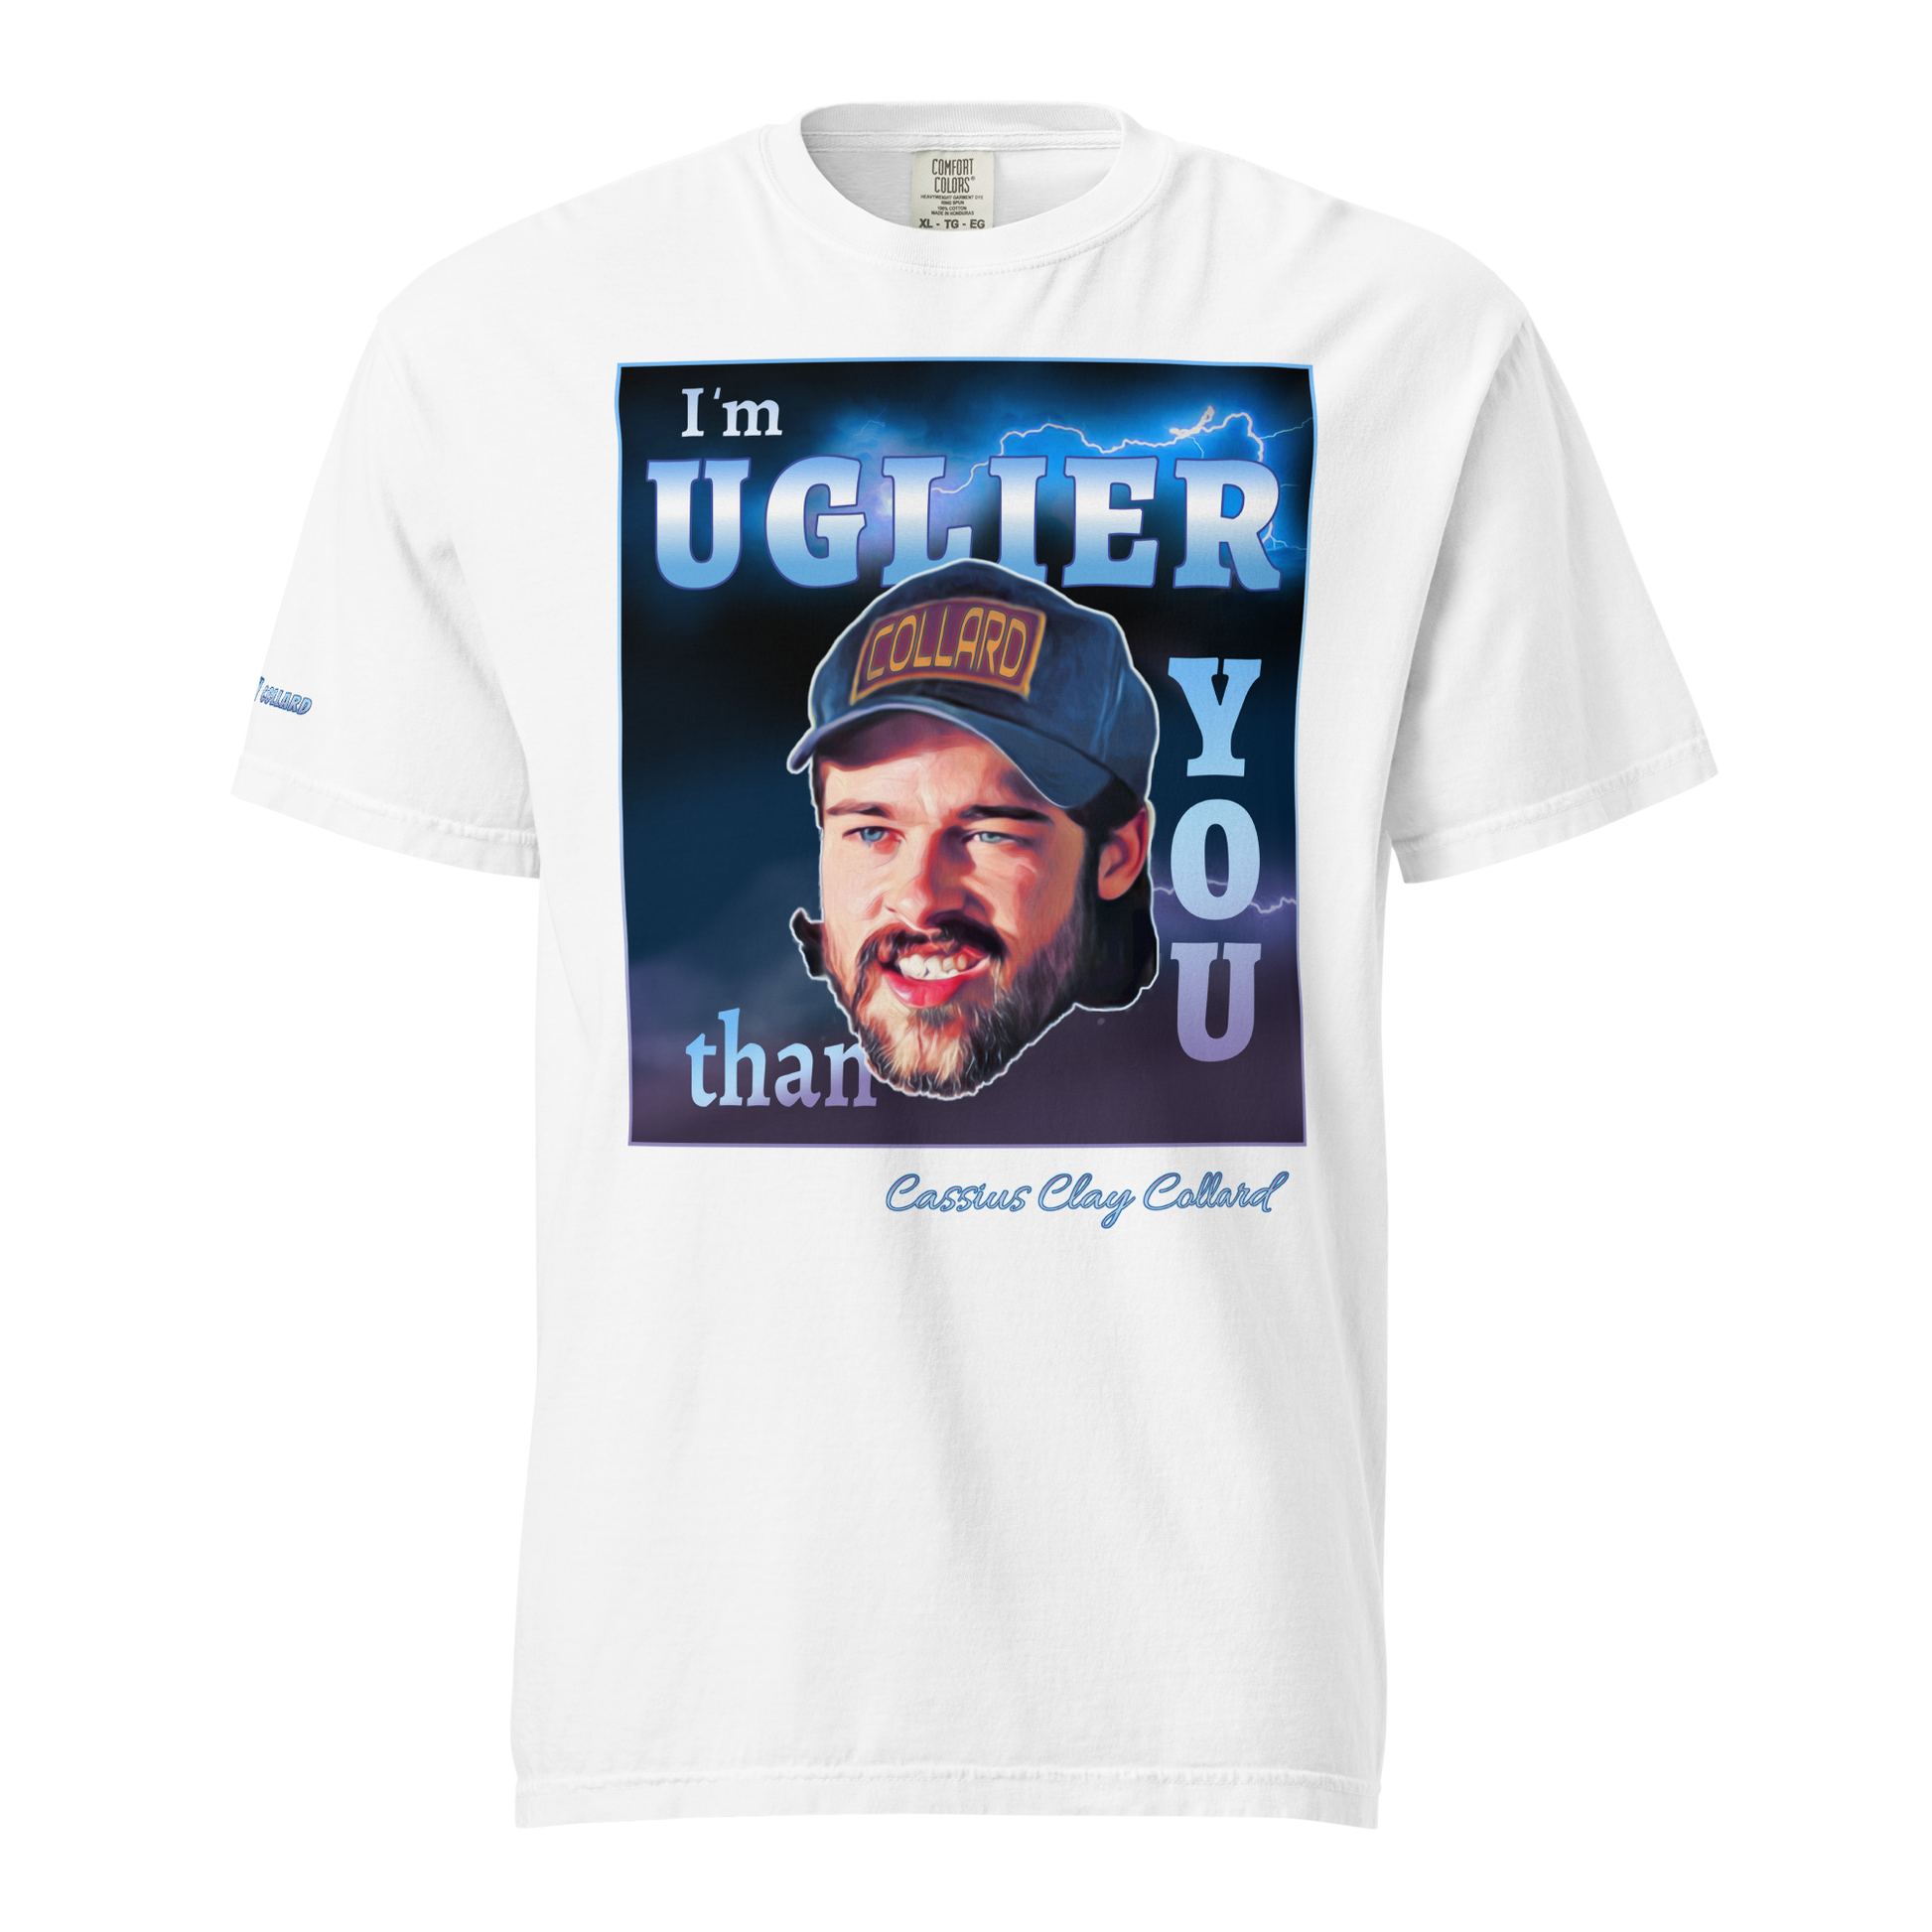 Cassius Clay Collard "I'm Uglier than You" T-Shirt STYLE 1 - southspace